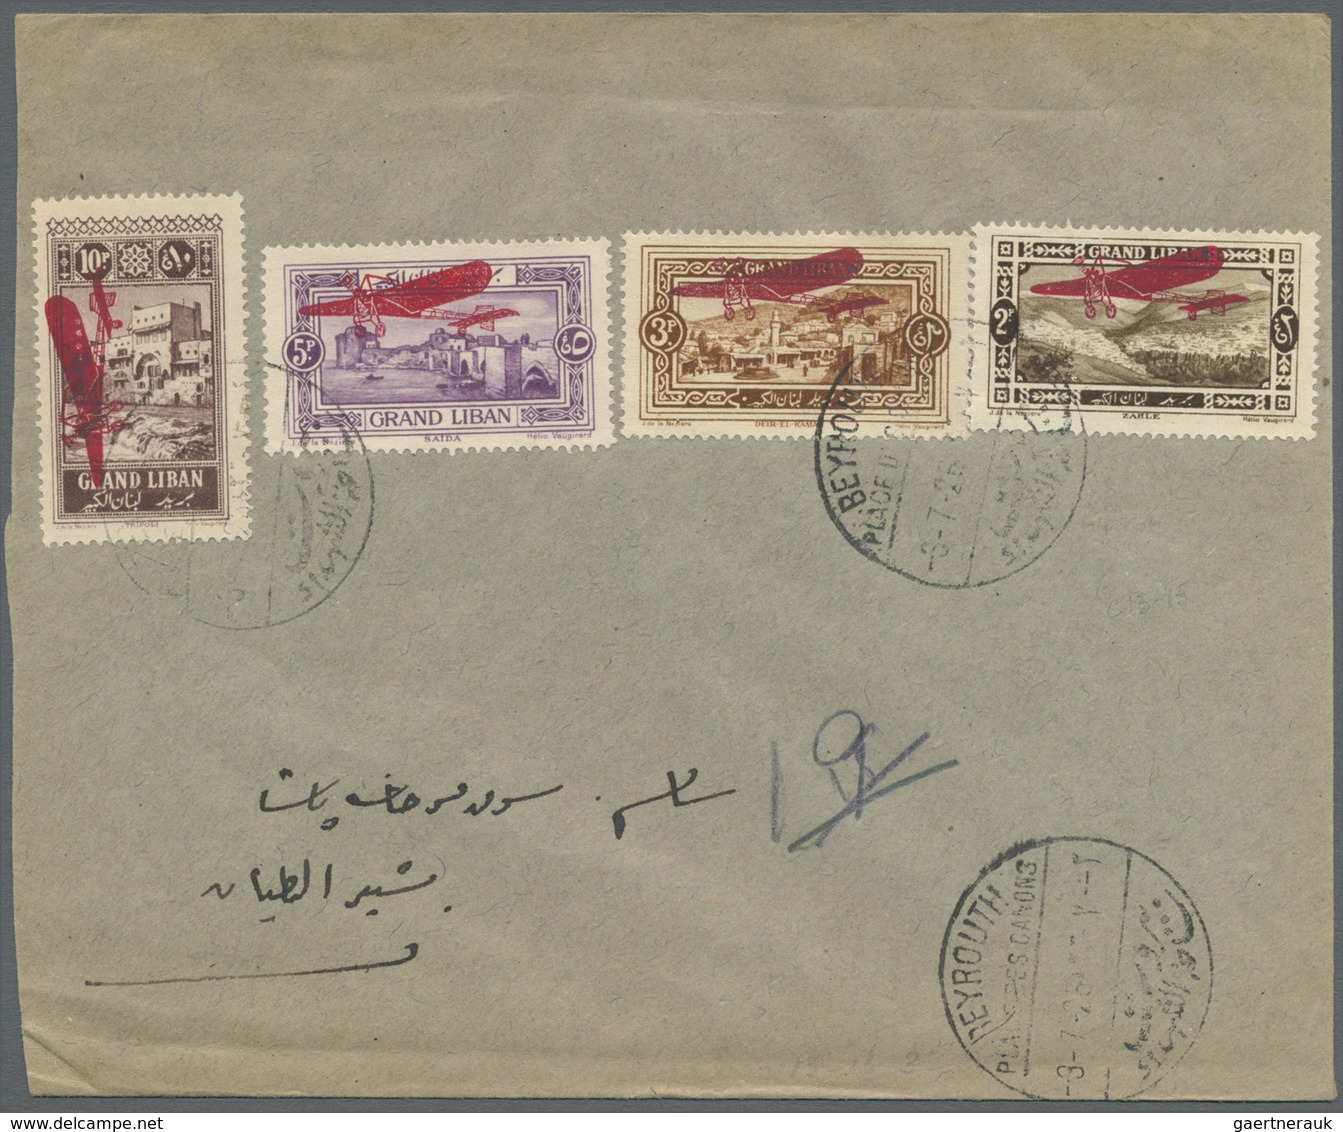 Br Libanon: 1926, Airmails, Red "Plane" Overprint, Complete Set Of Four Values, Attractive Franking On - Libanon